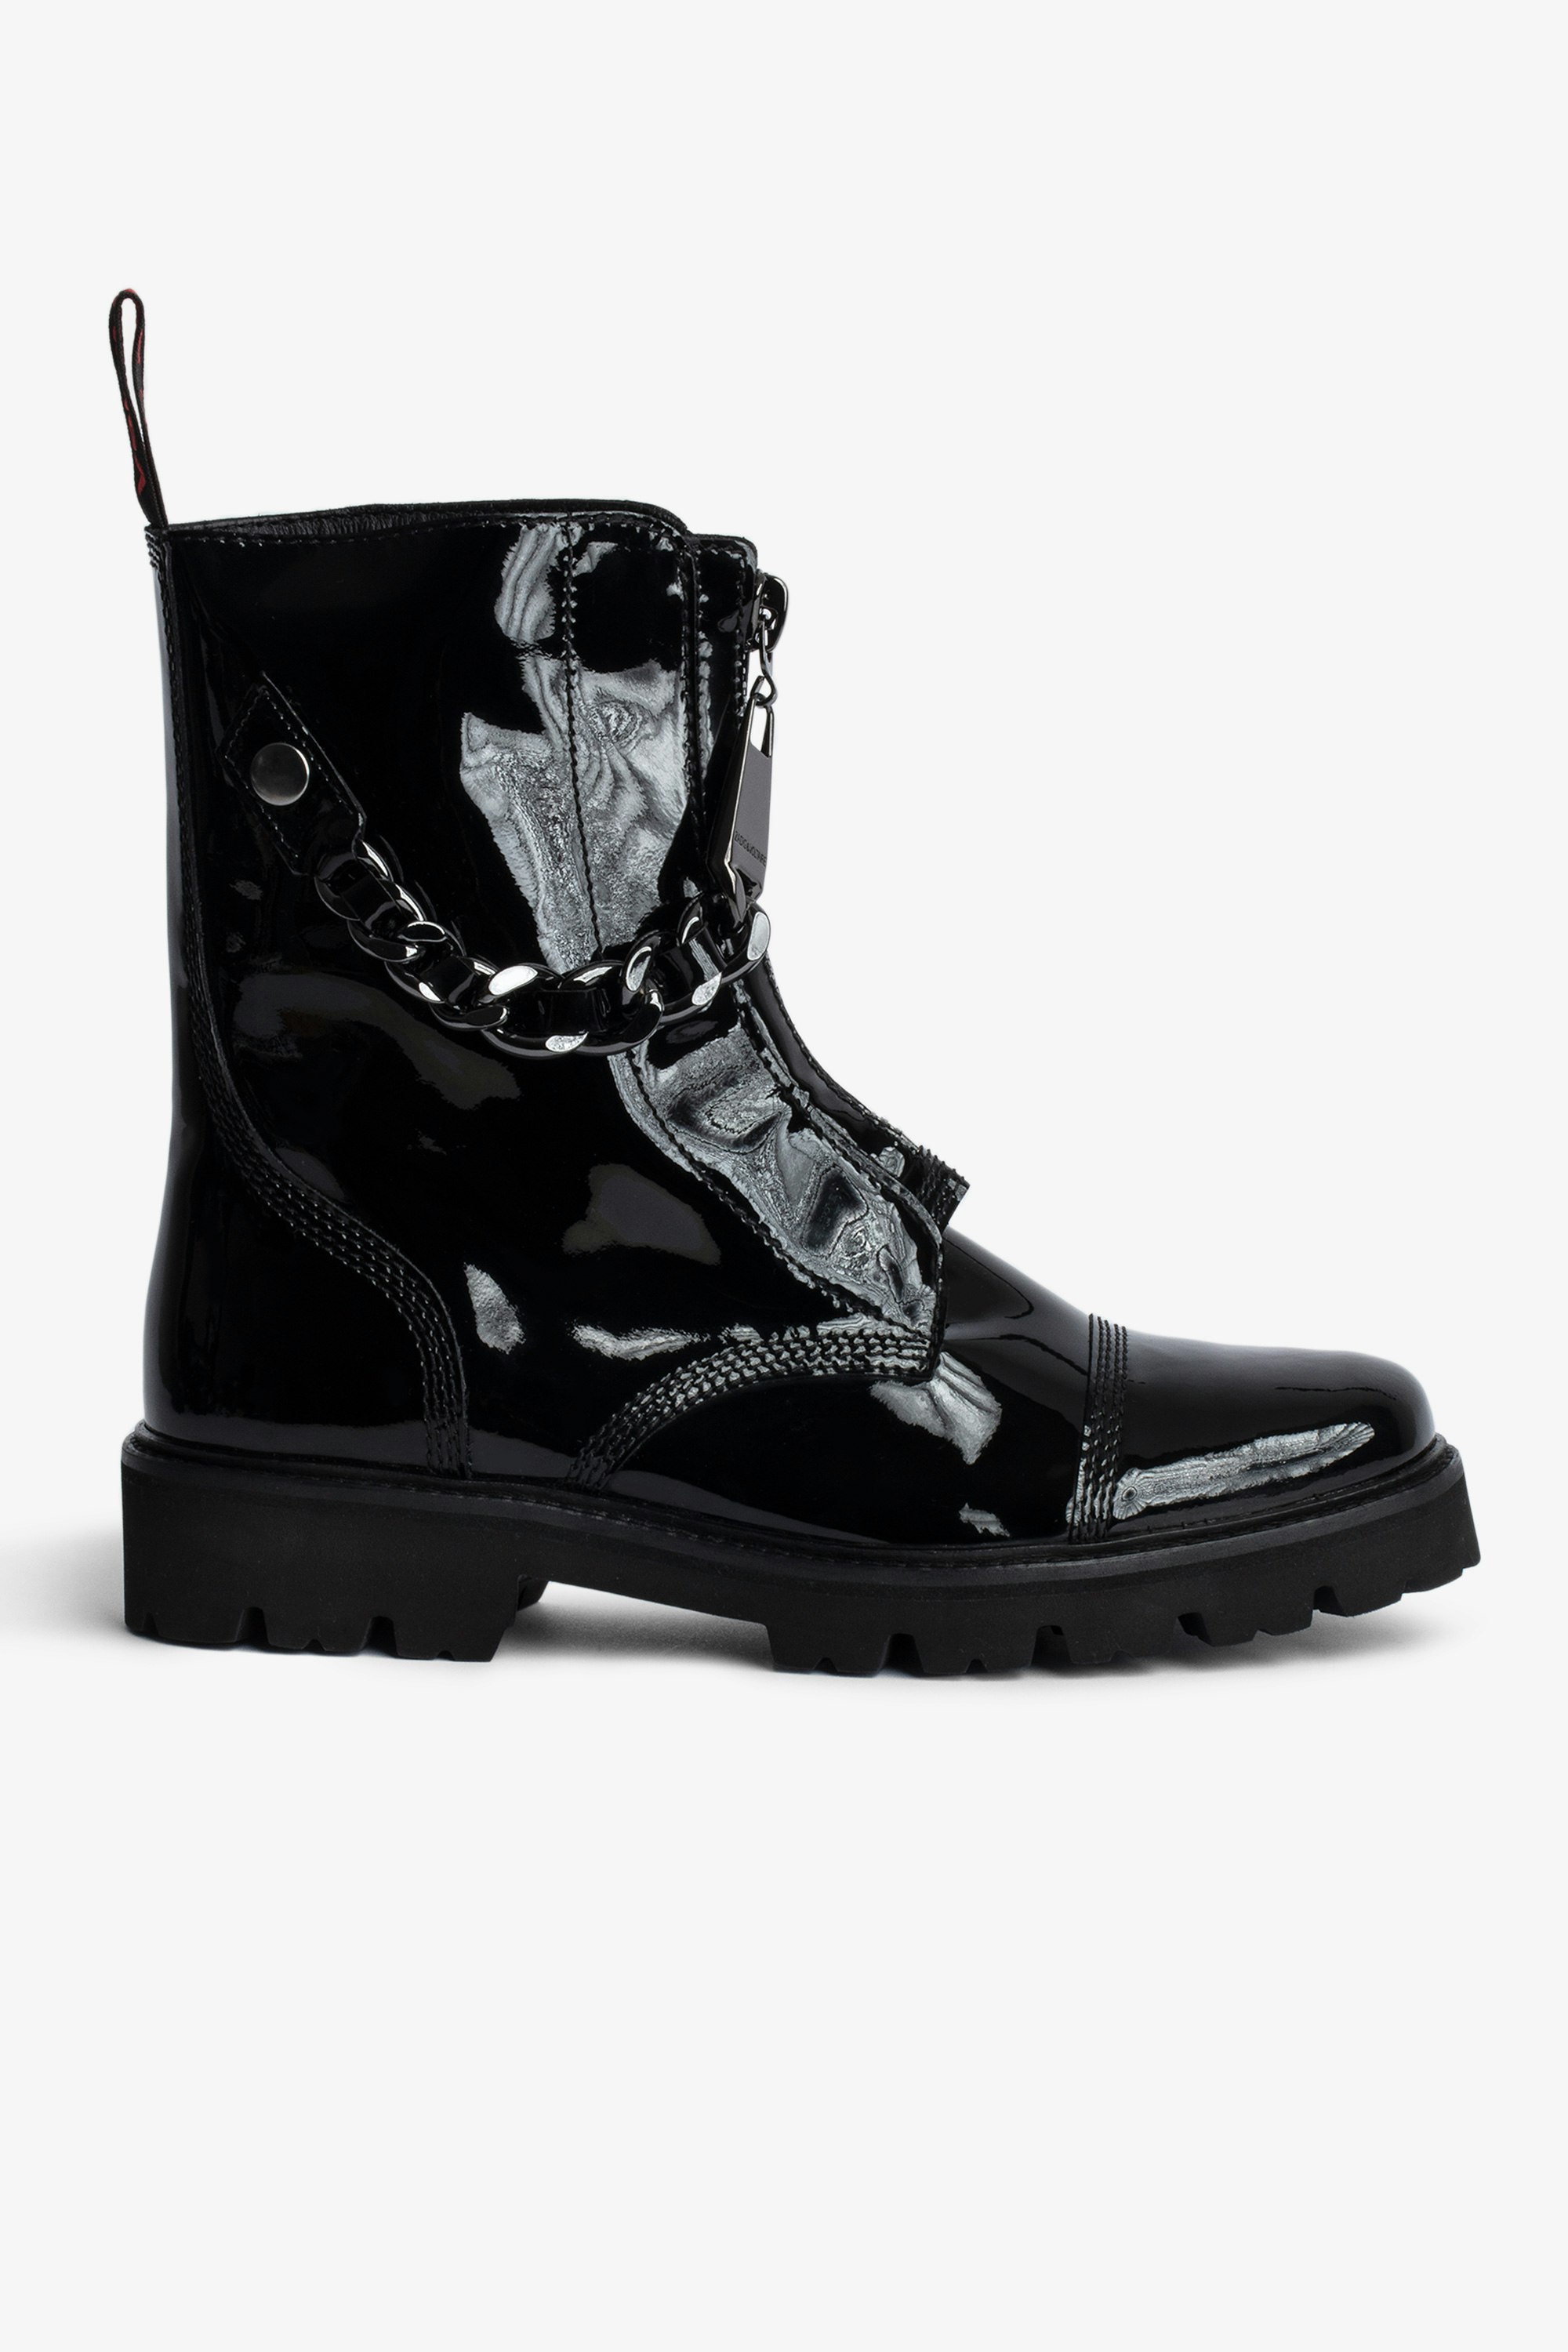 Joe Ankle Boots Women’s black patent leather mid-calf boots with an interwoven metal and leather chain